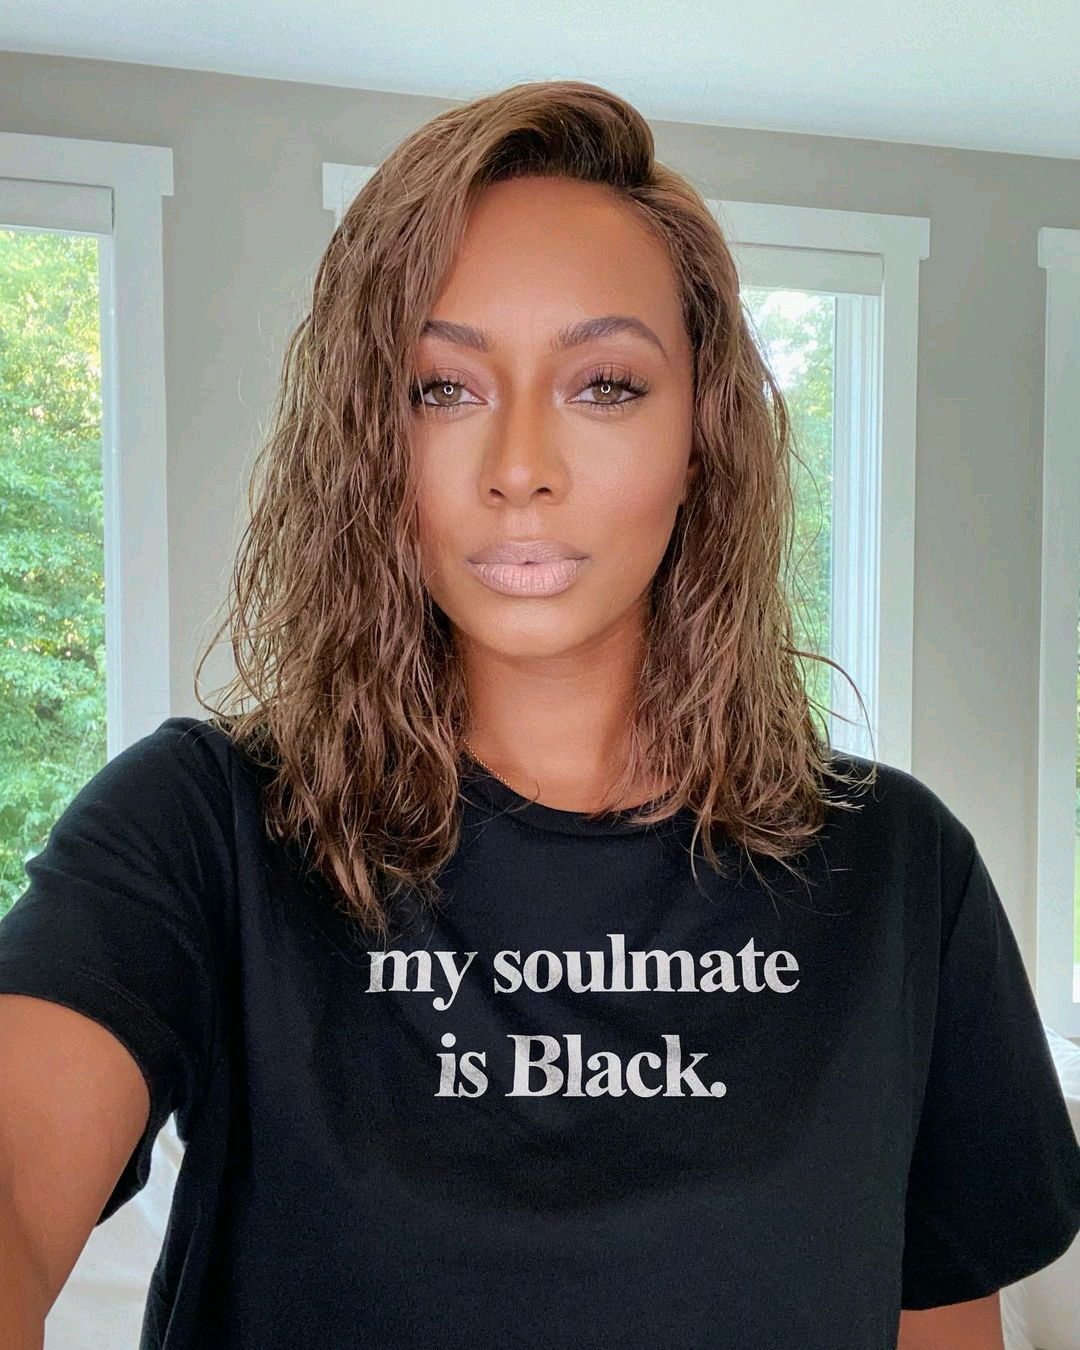 Women Are Naturally Submissive To Men Who Provide Emotional Security - Singer Keri Hilson